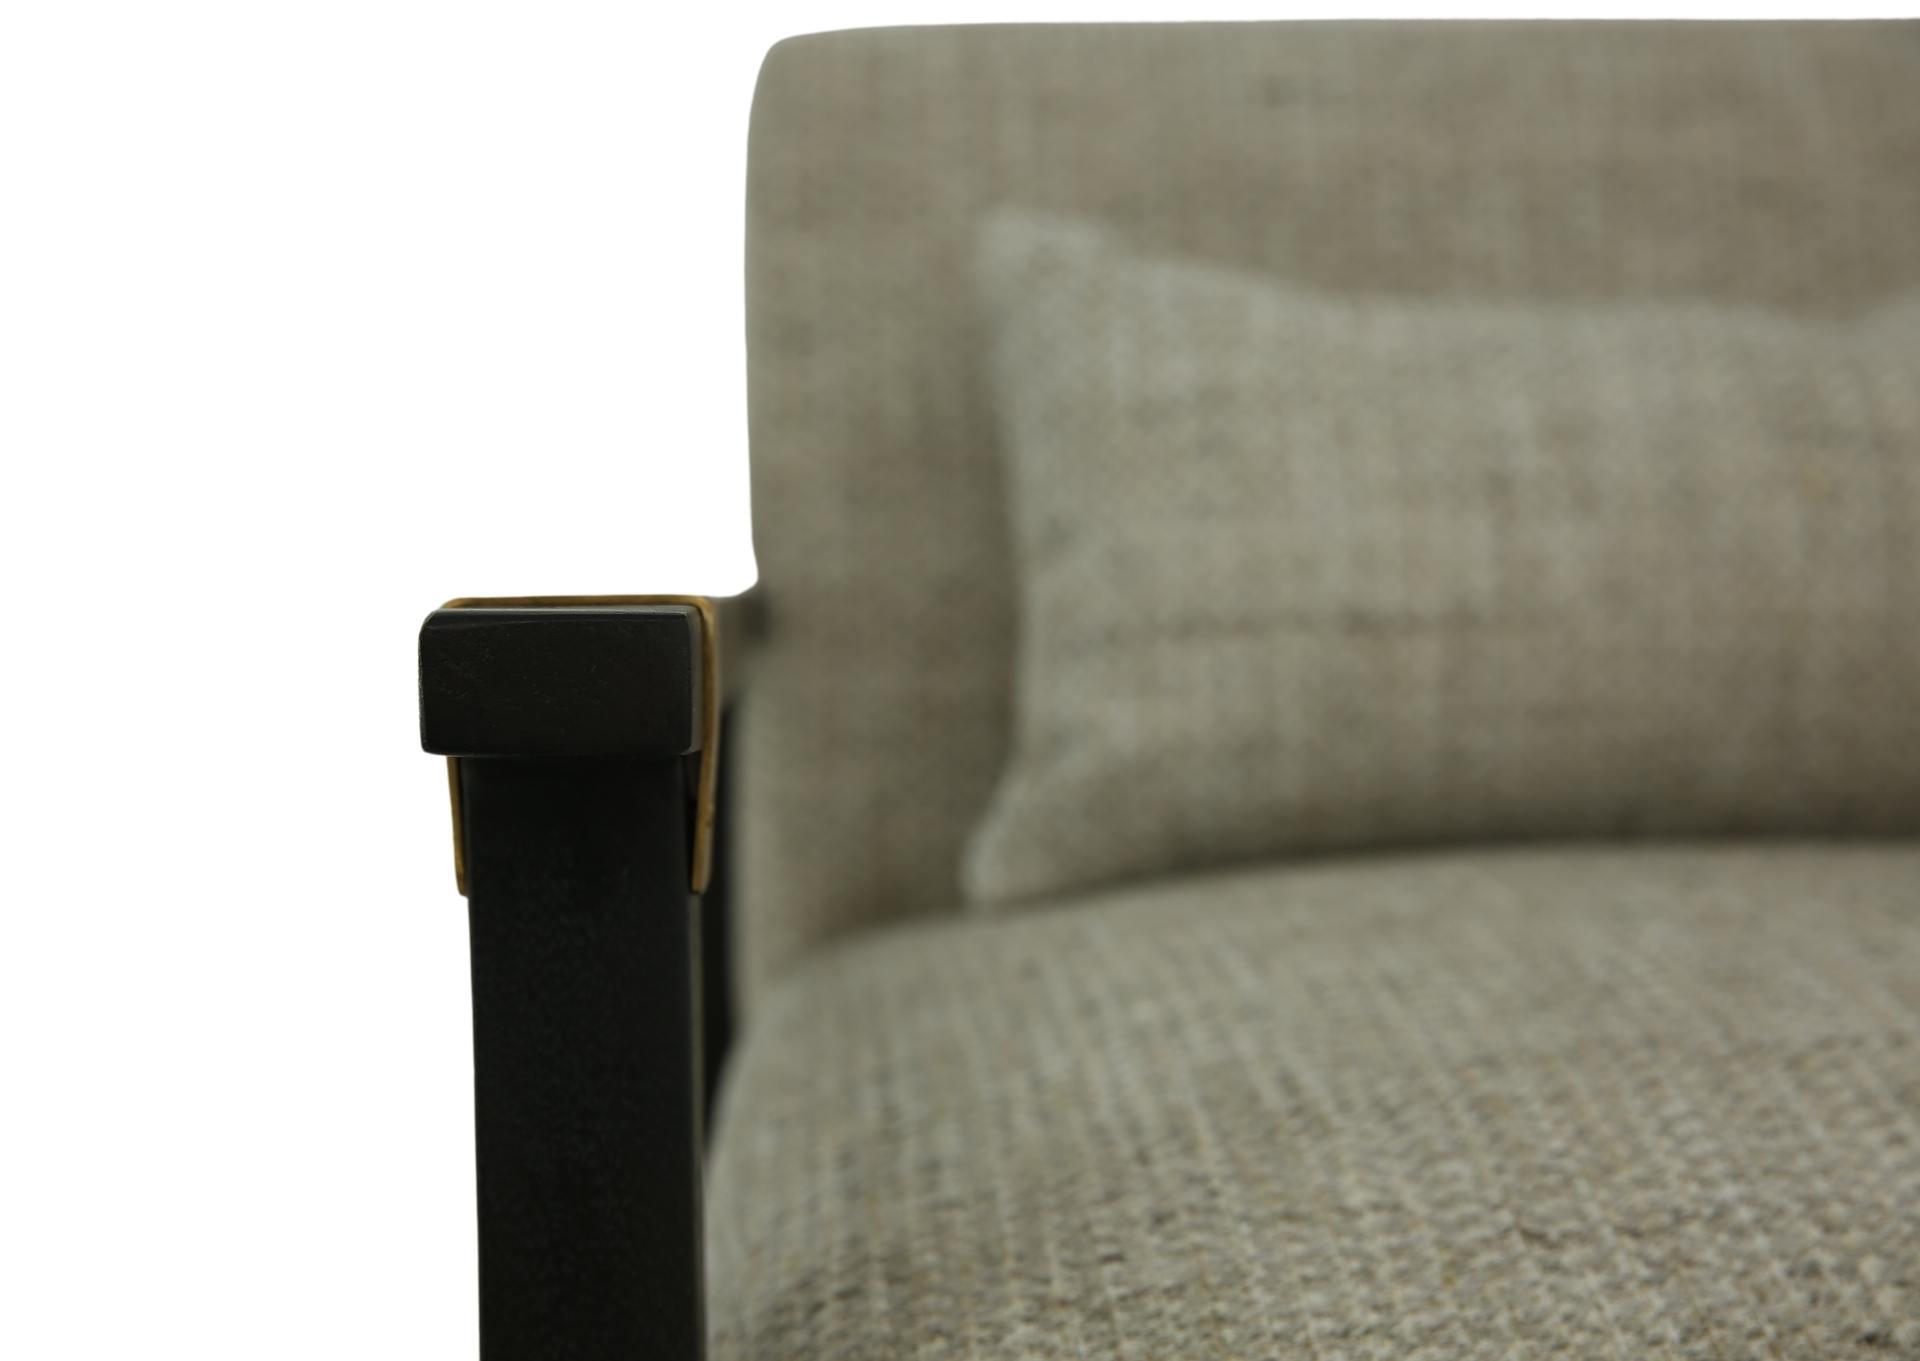 BALINTMORE CEMENT ACCENT CHAIR,ASHLEY FURNITURE INC.